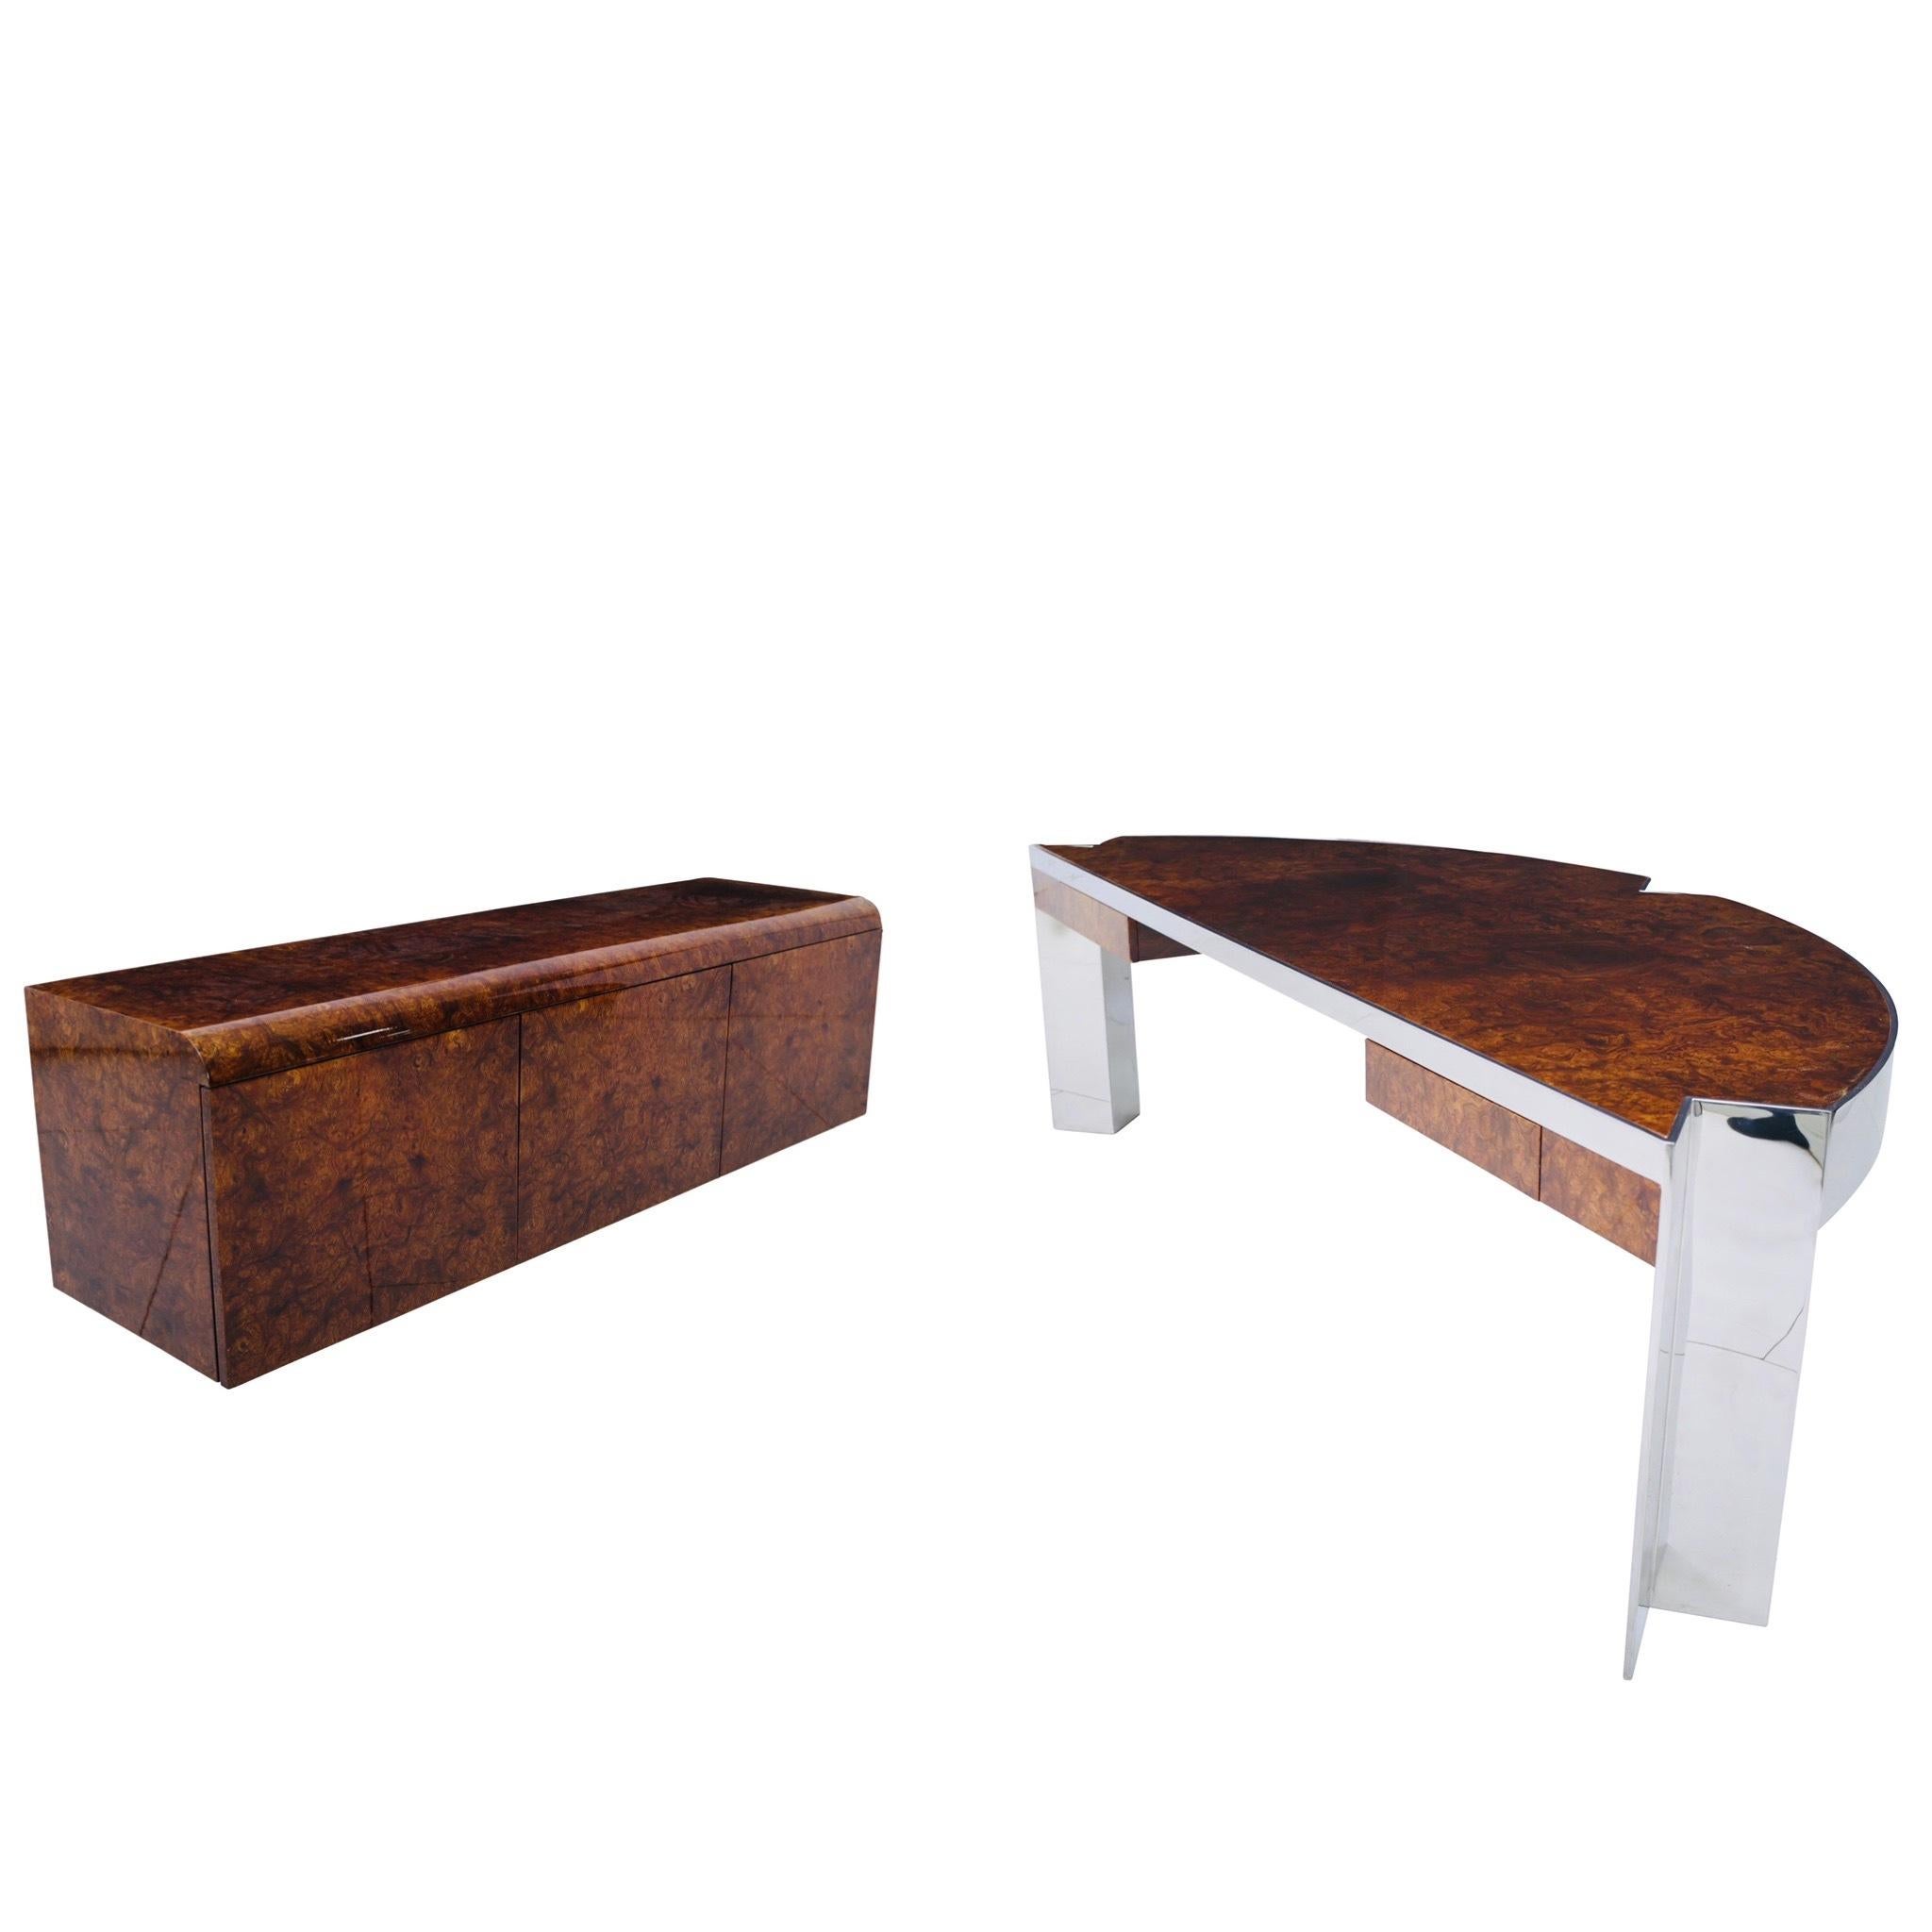 ‘Mezzaluna” Pace Collection Burl Wood and Stainless Steel Desk 2